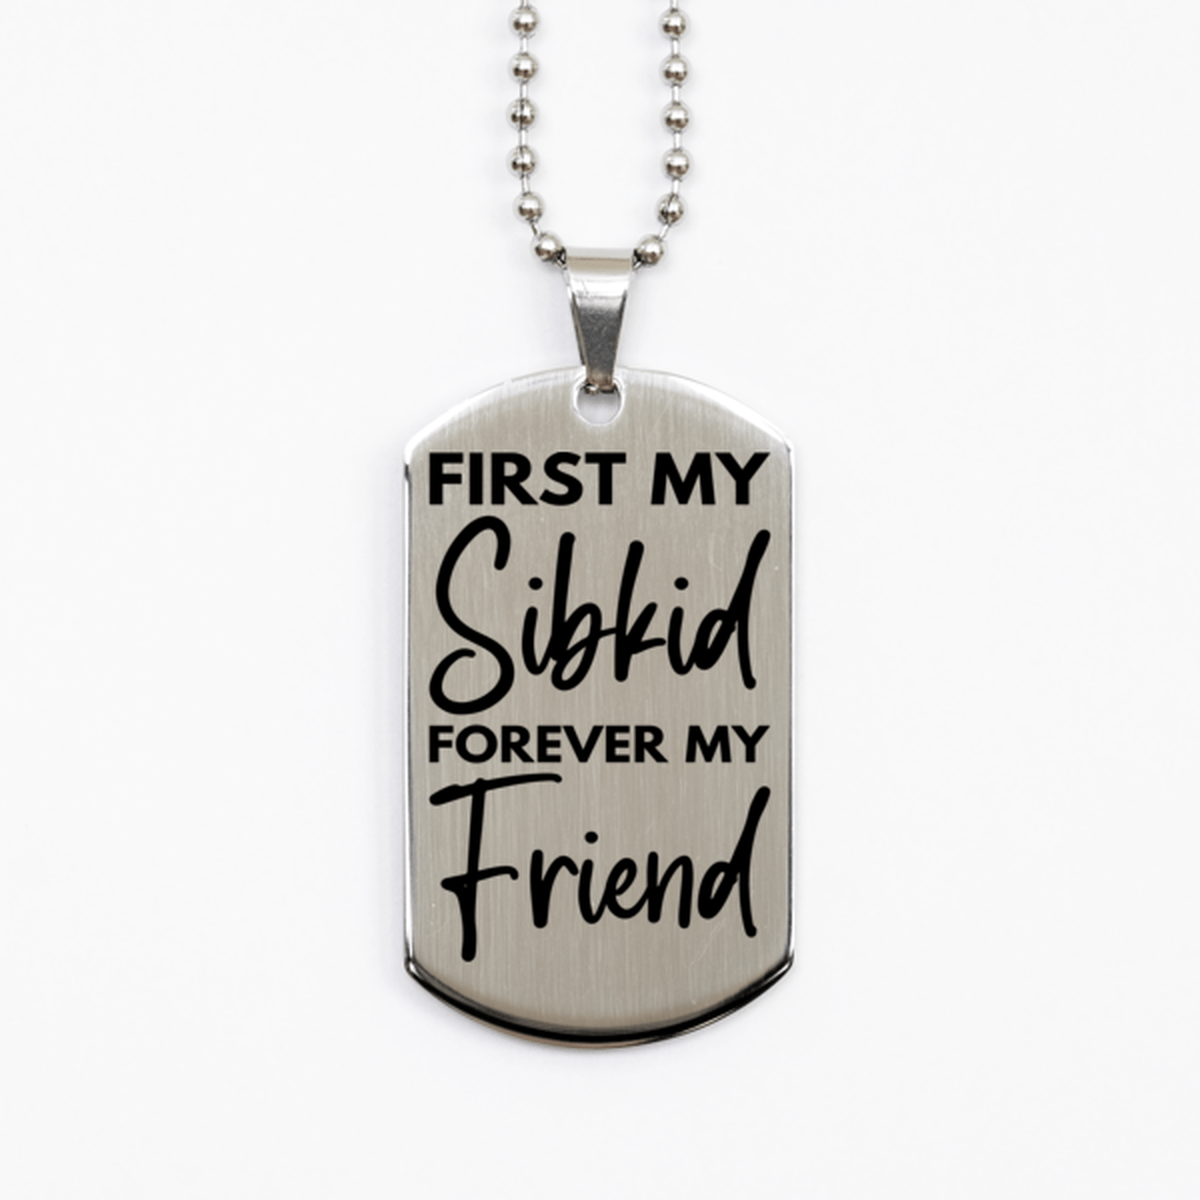 Inspirational Sibkid Silver Dog Tag Necklace, First My Sibkid Forever My Friend, Best Birthday Gifts for Sibkid